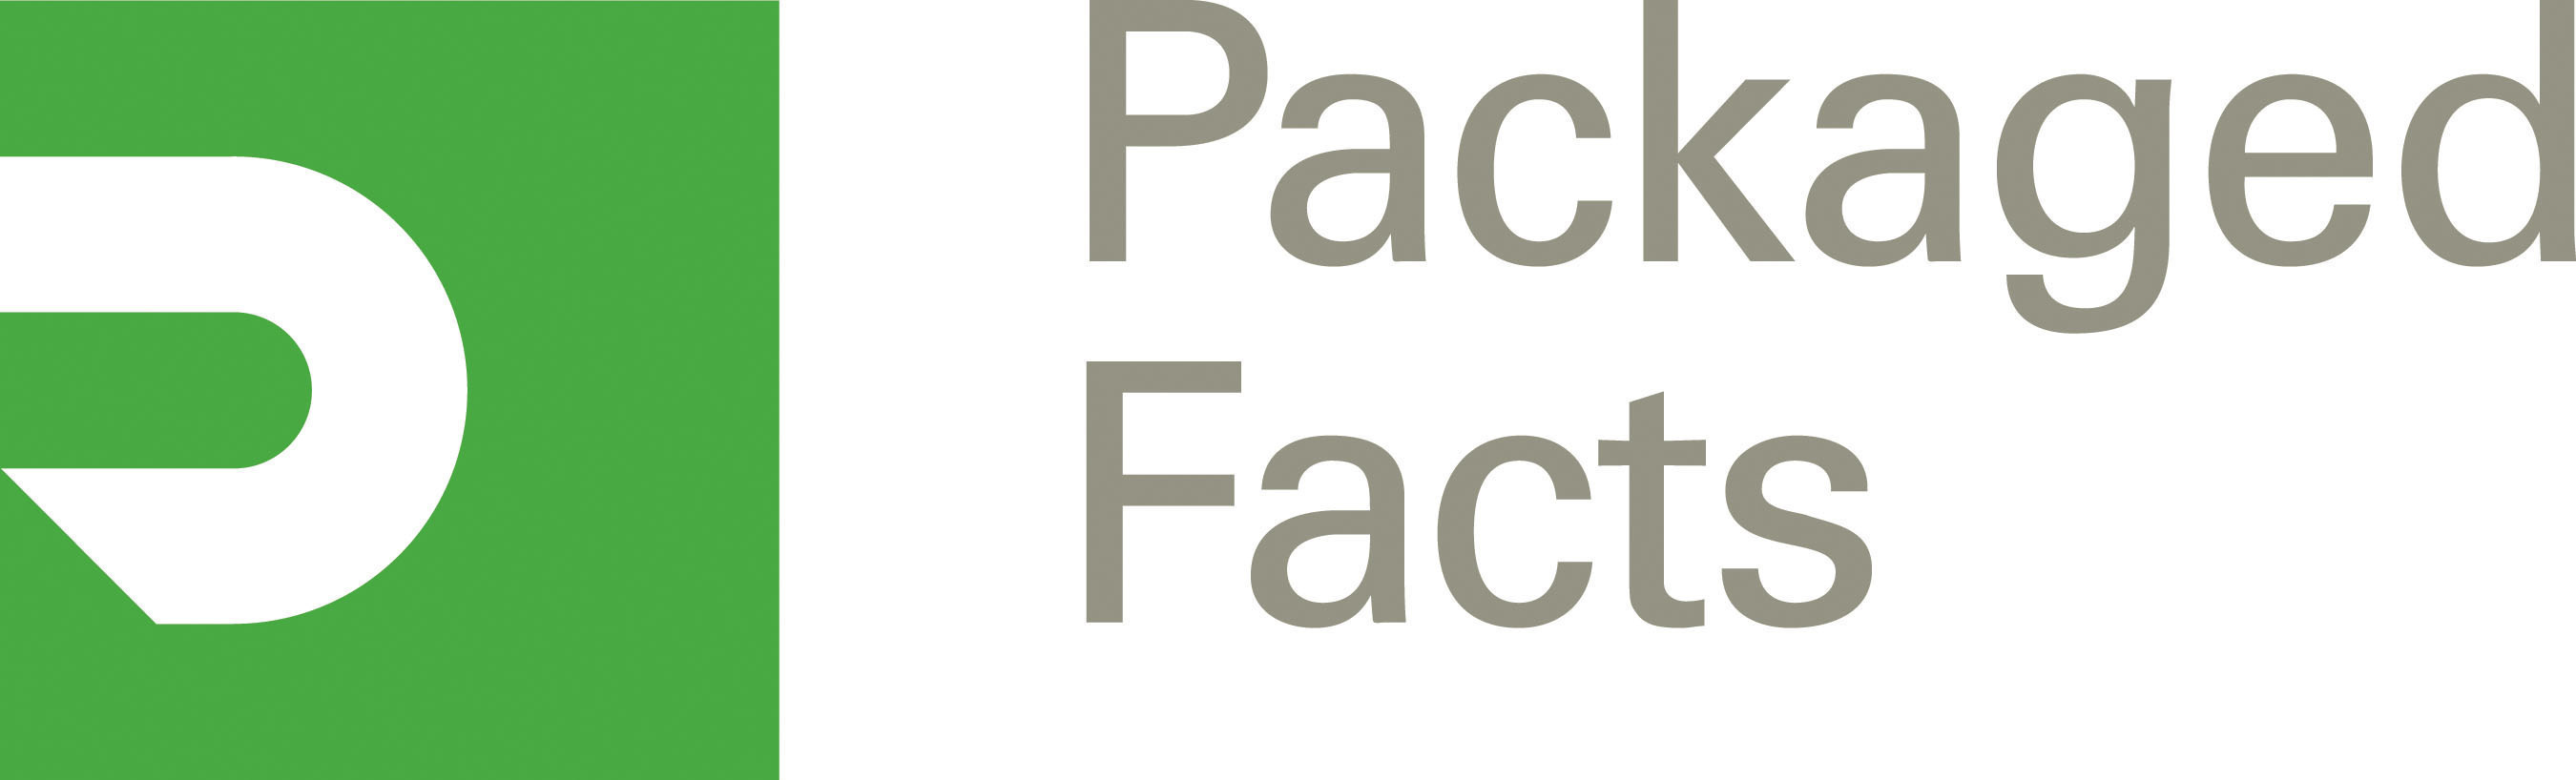 Packaged Facts Log